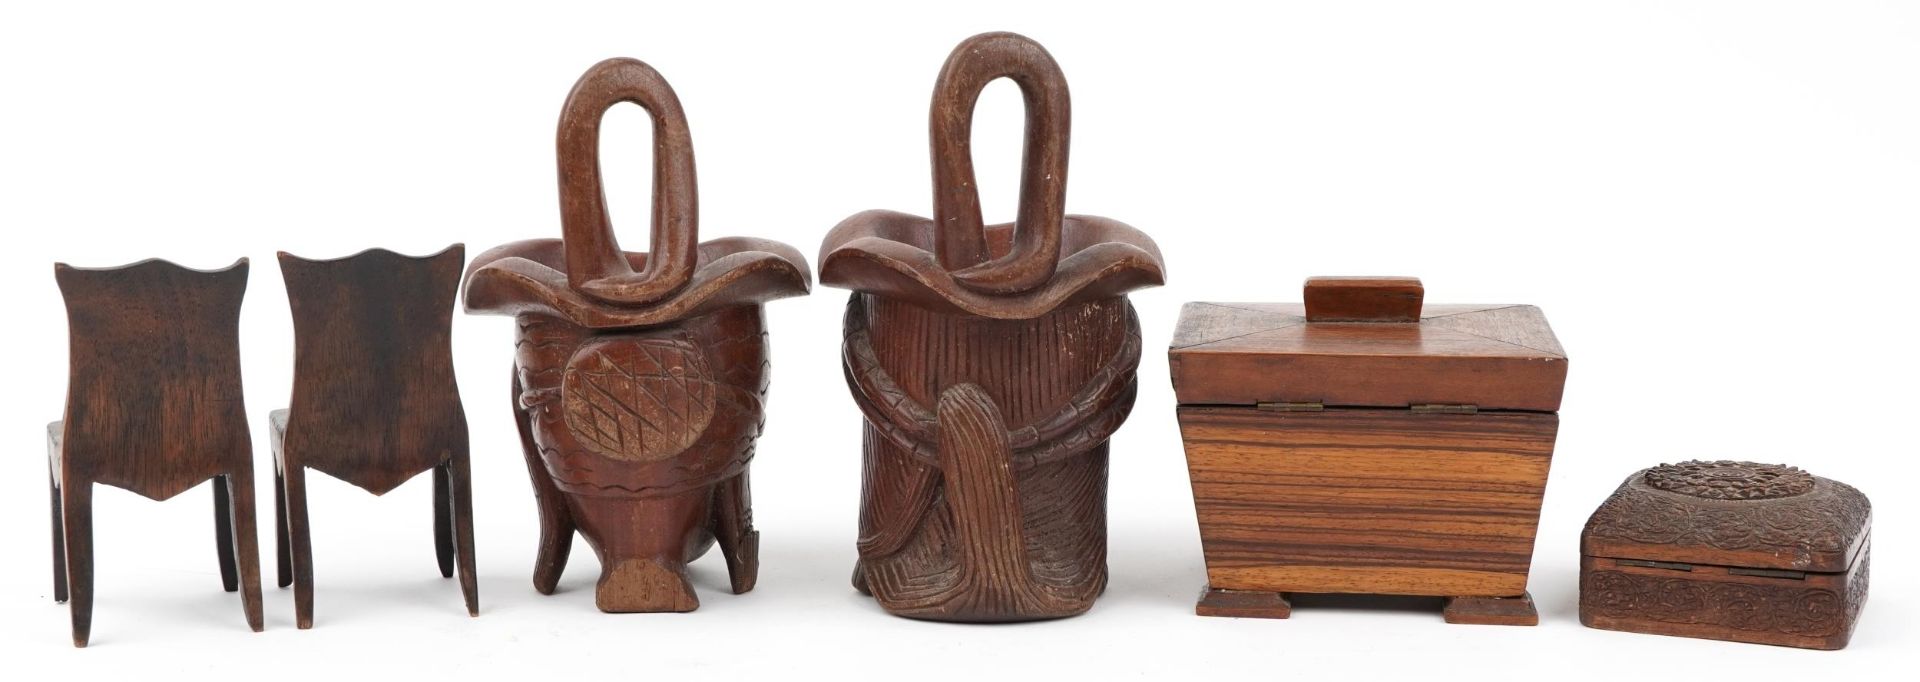 Woodenware including a rosewood casket and a pair of Indian figural cups, the largest 24cm high - Image 2 of 3